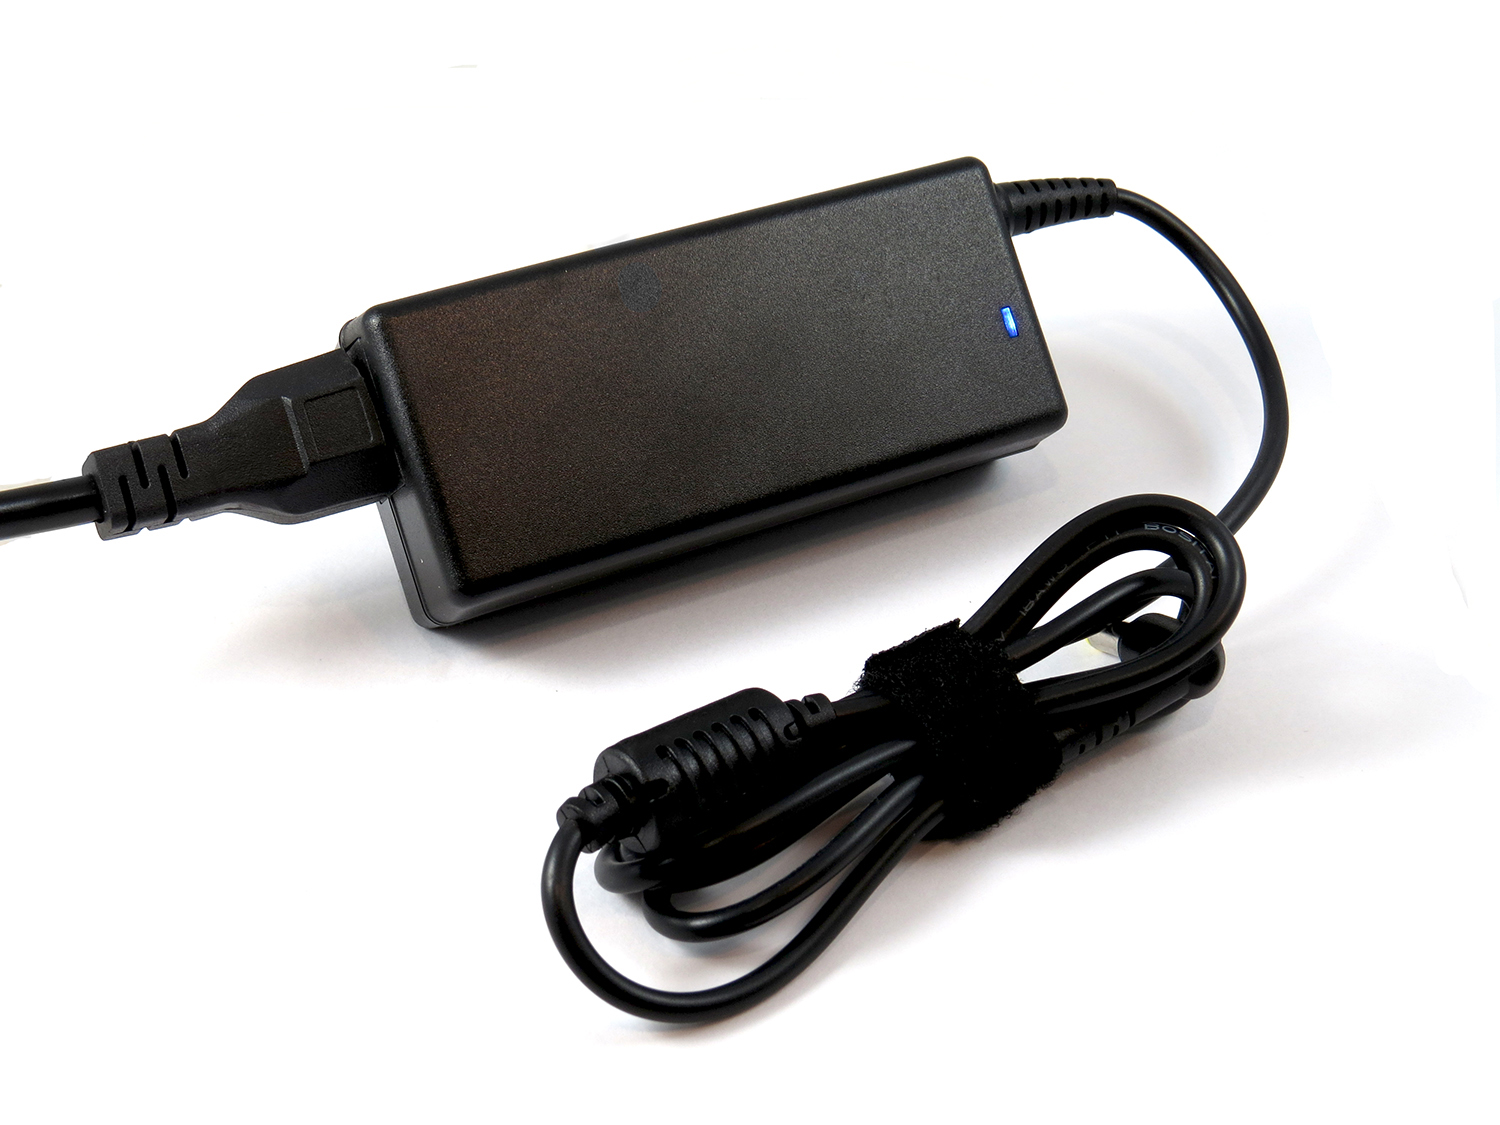 AC Adapter Charger for Panasonic Toughbook Cf-18 Cf-19 Cf-p1 Cf-r1 - image 2 of 3